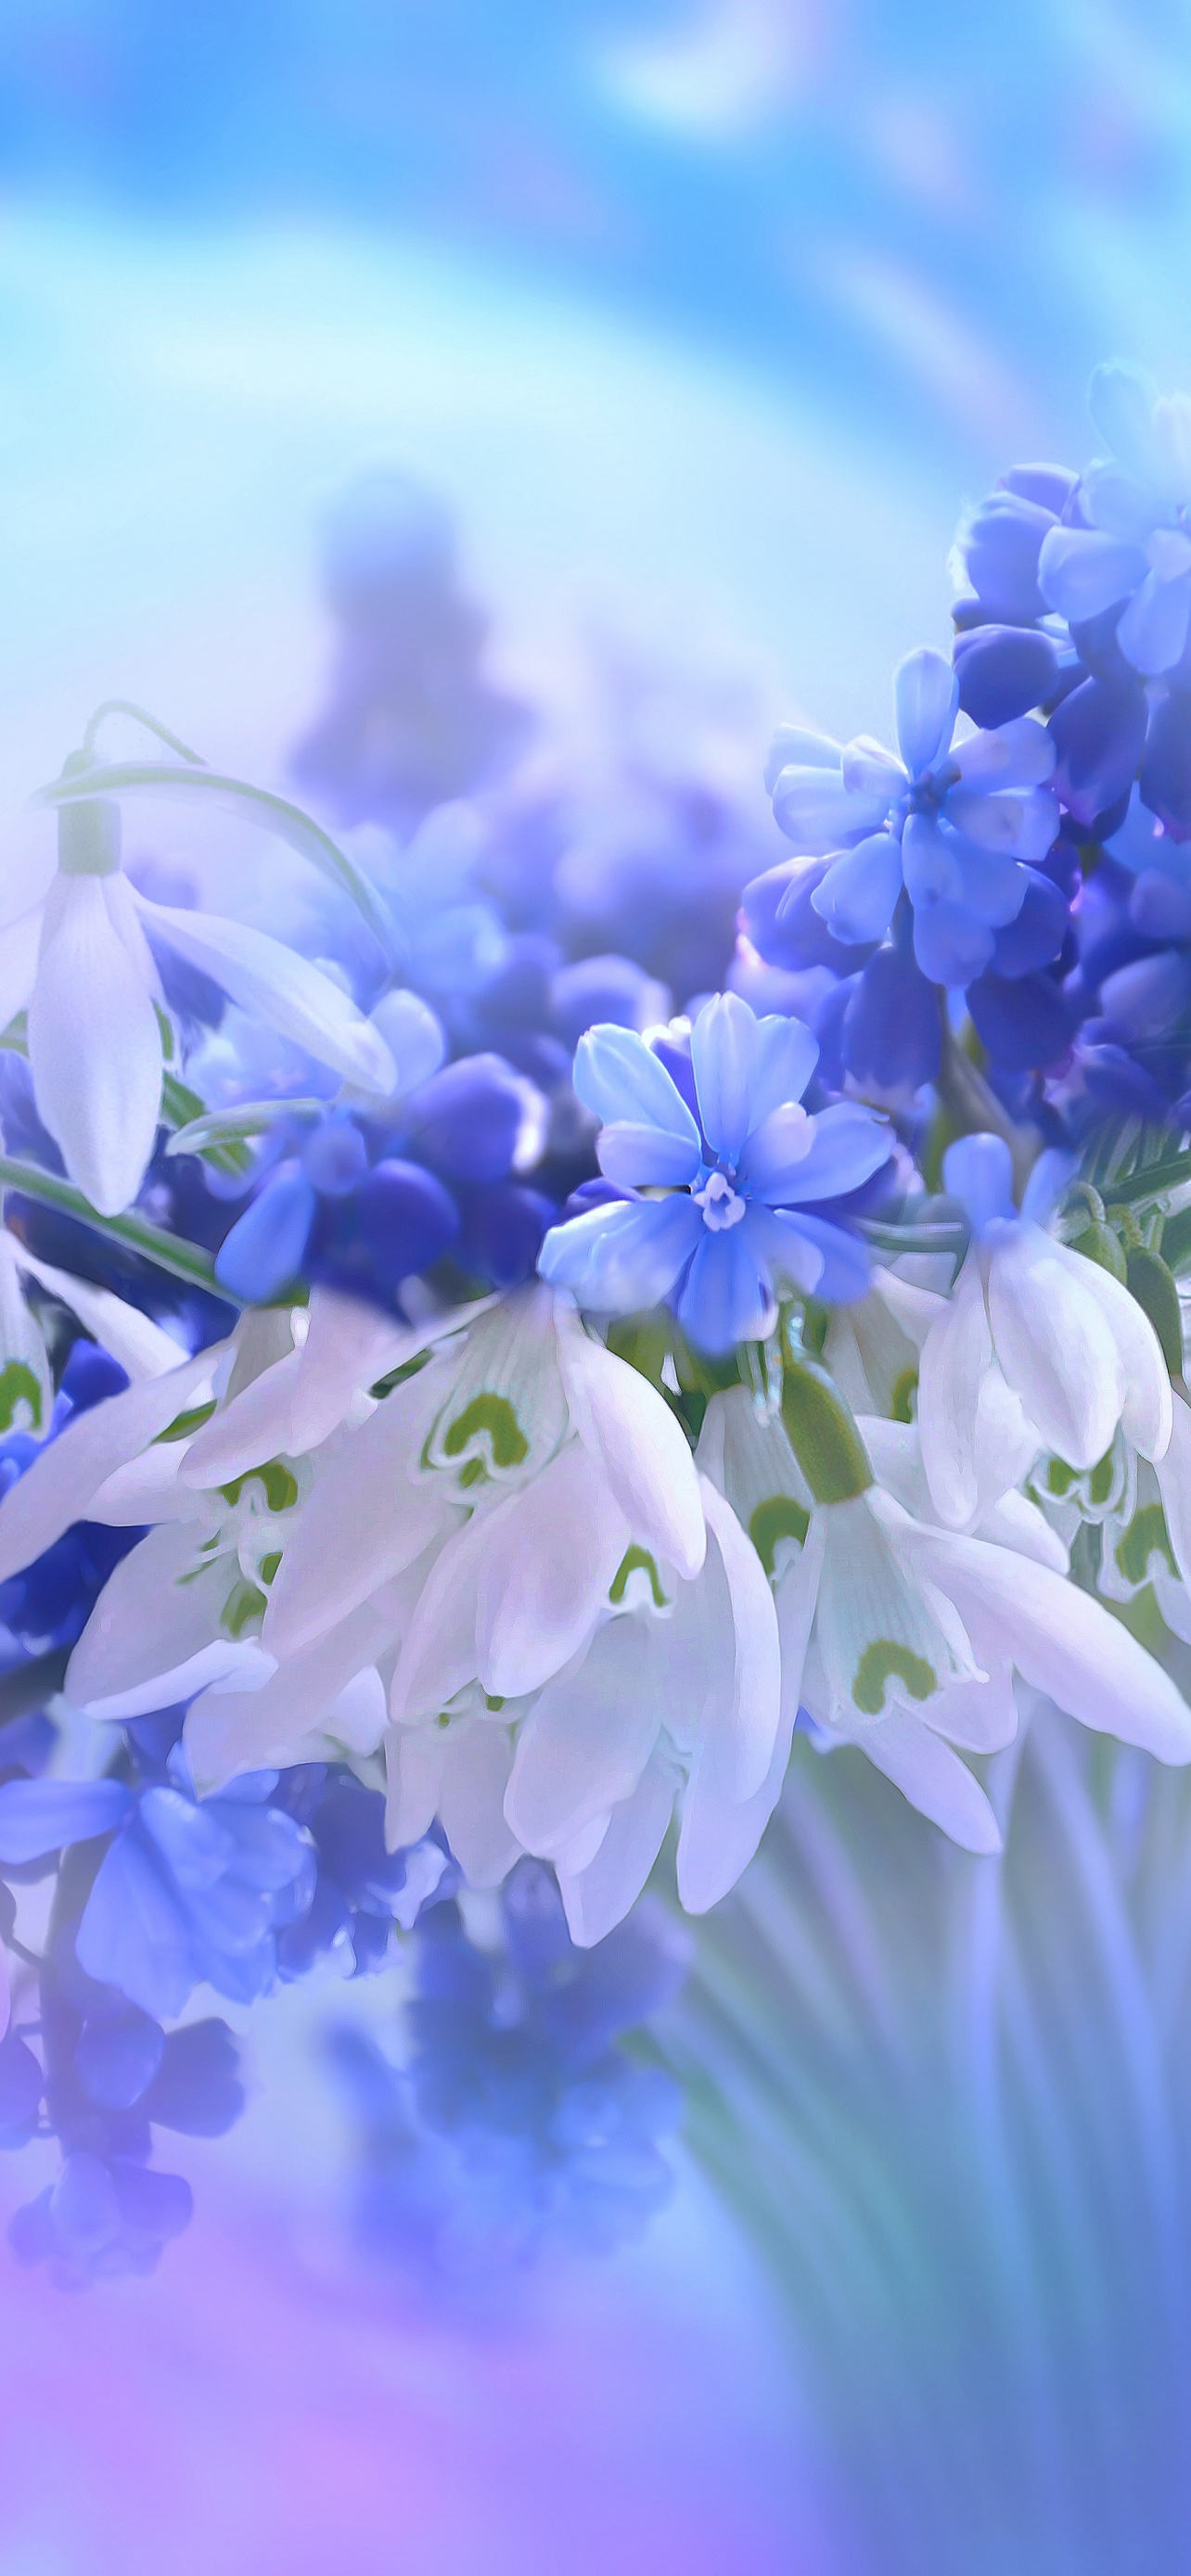  Flowers HD Wallpapers Nature Wallpaper Full Free Download